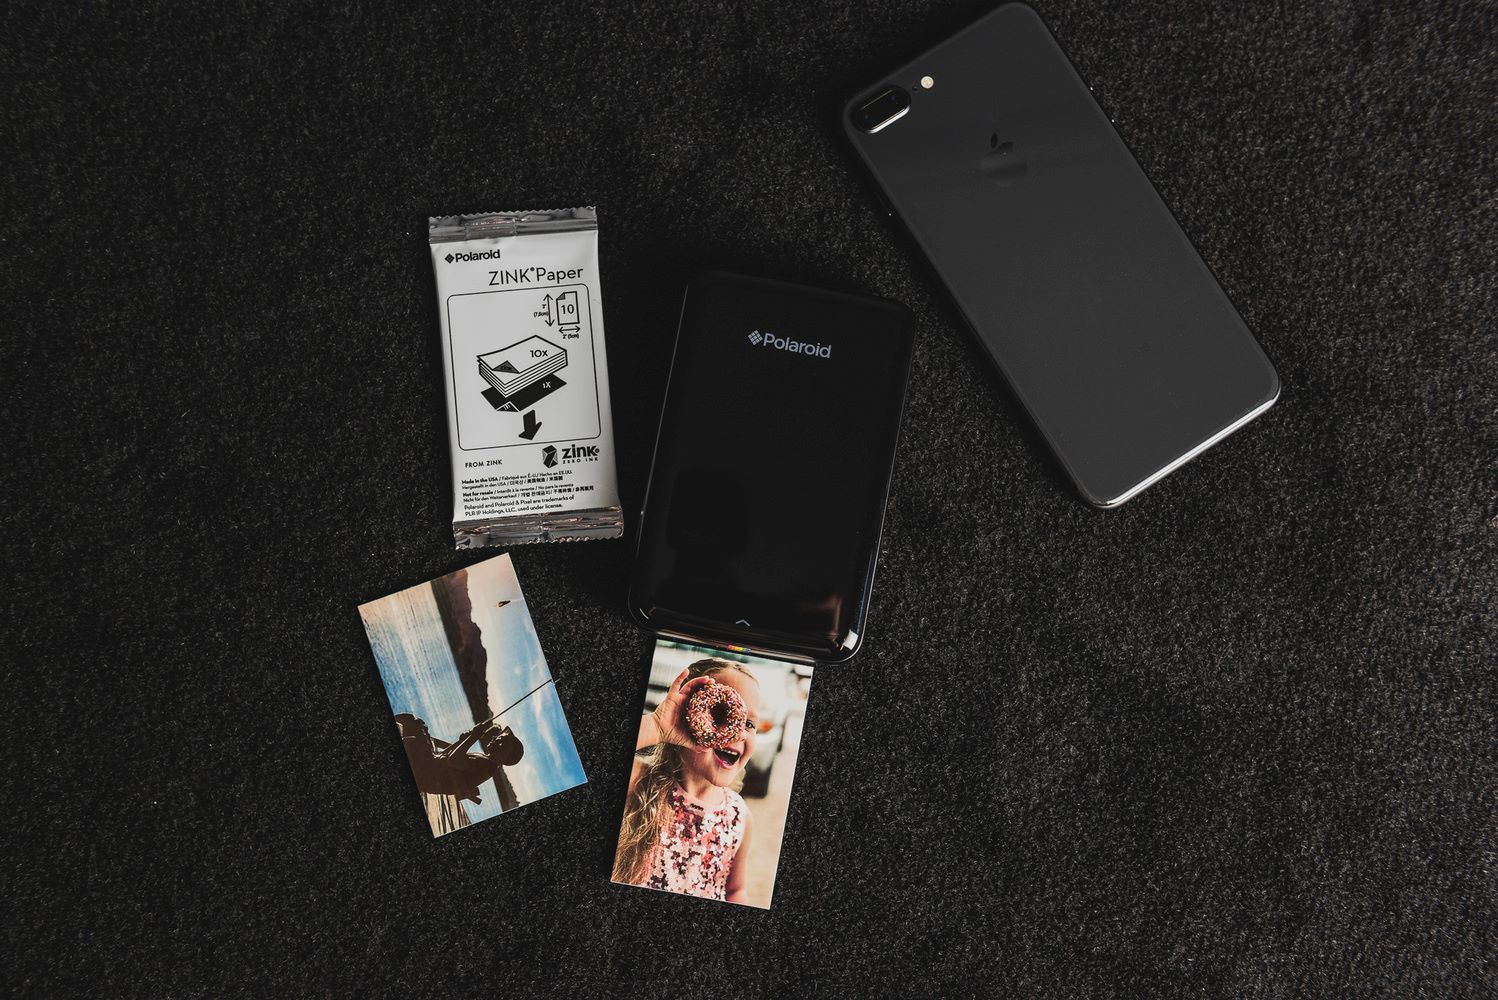 polaroid-zip-instant-photoprinter-review-its-a-snap-to-use